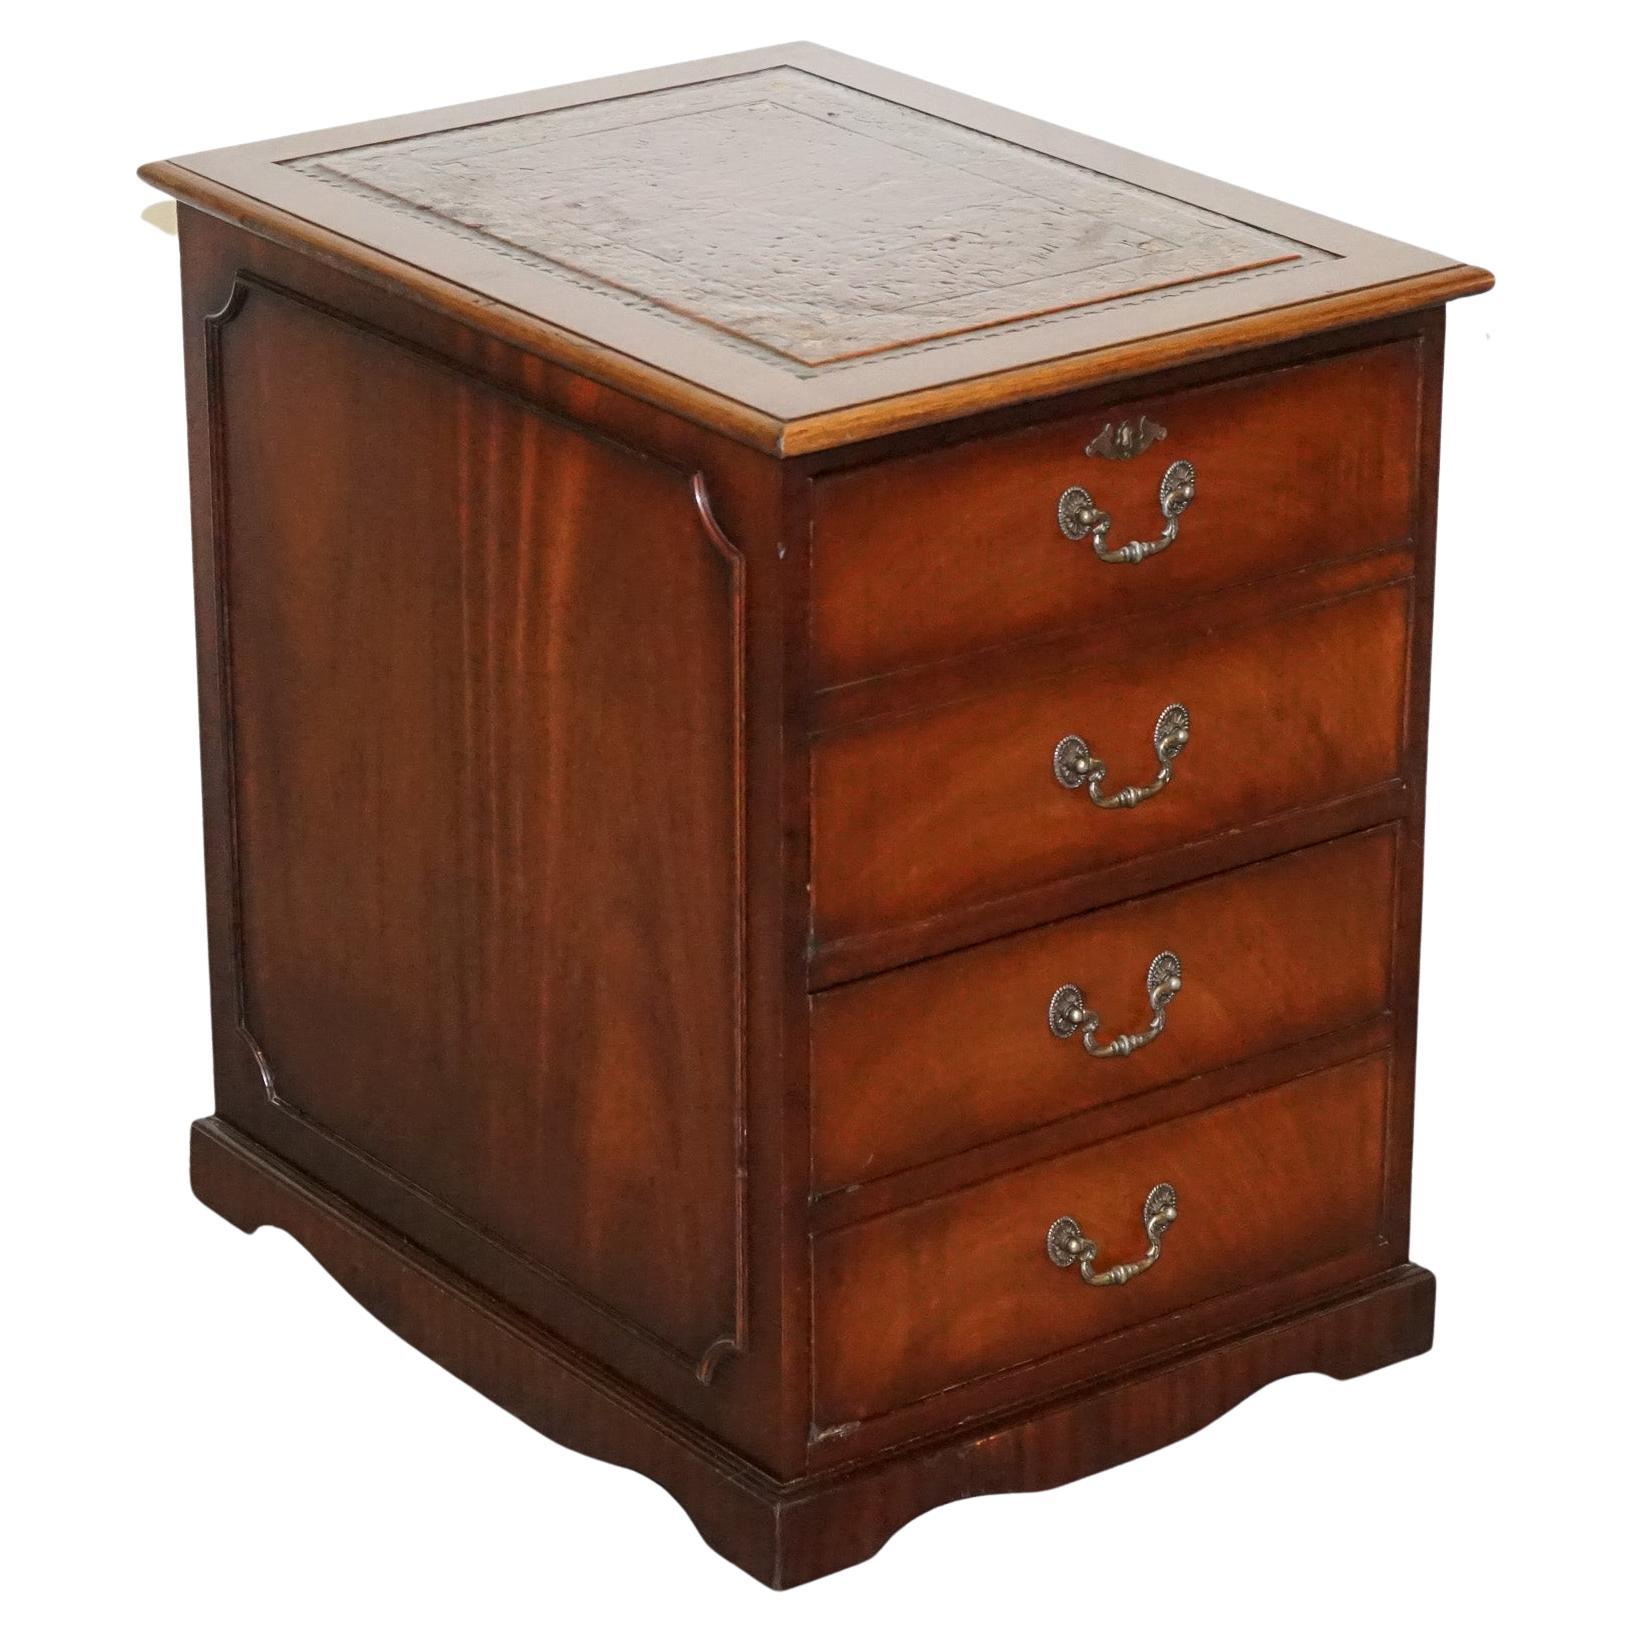 GOLDEMBOSSED BROWN LEATHER TOP FILLING CABiNET - MATCHING DESK AVAILABLE